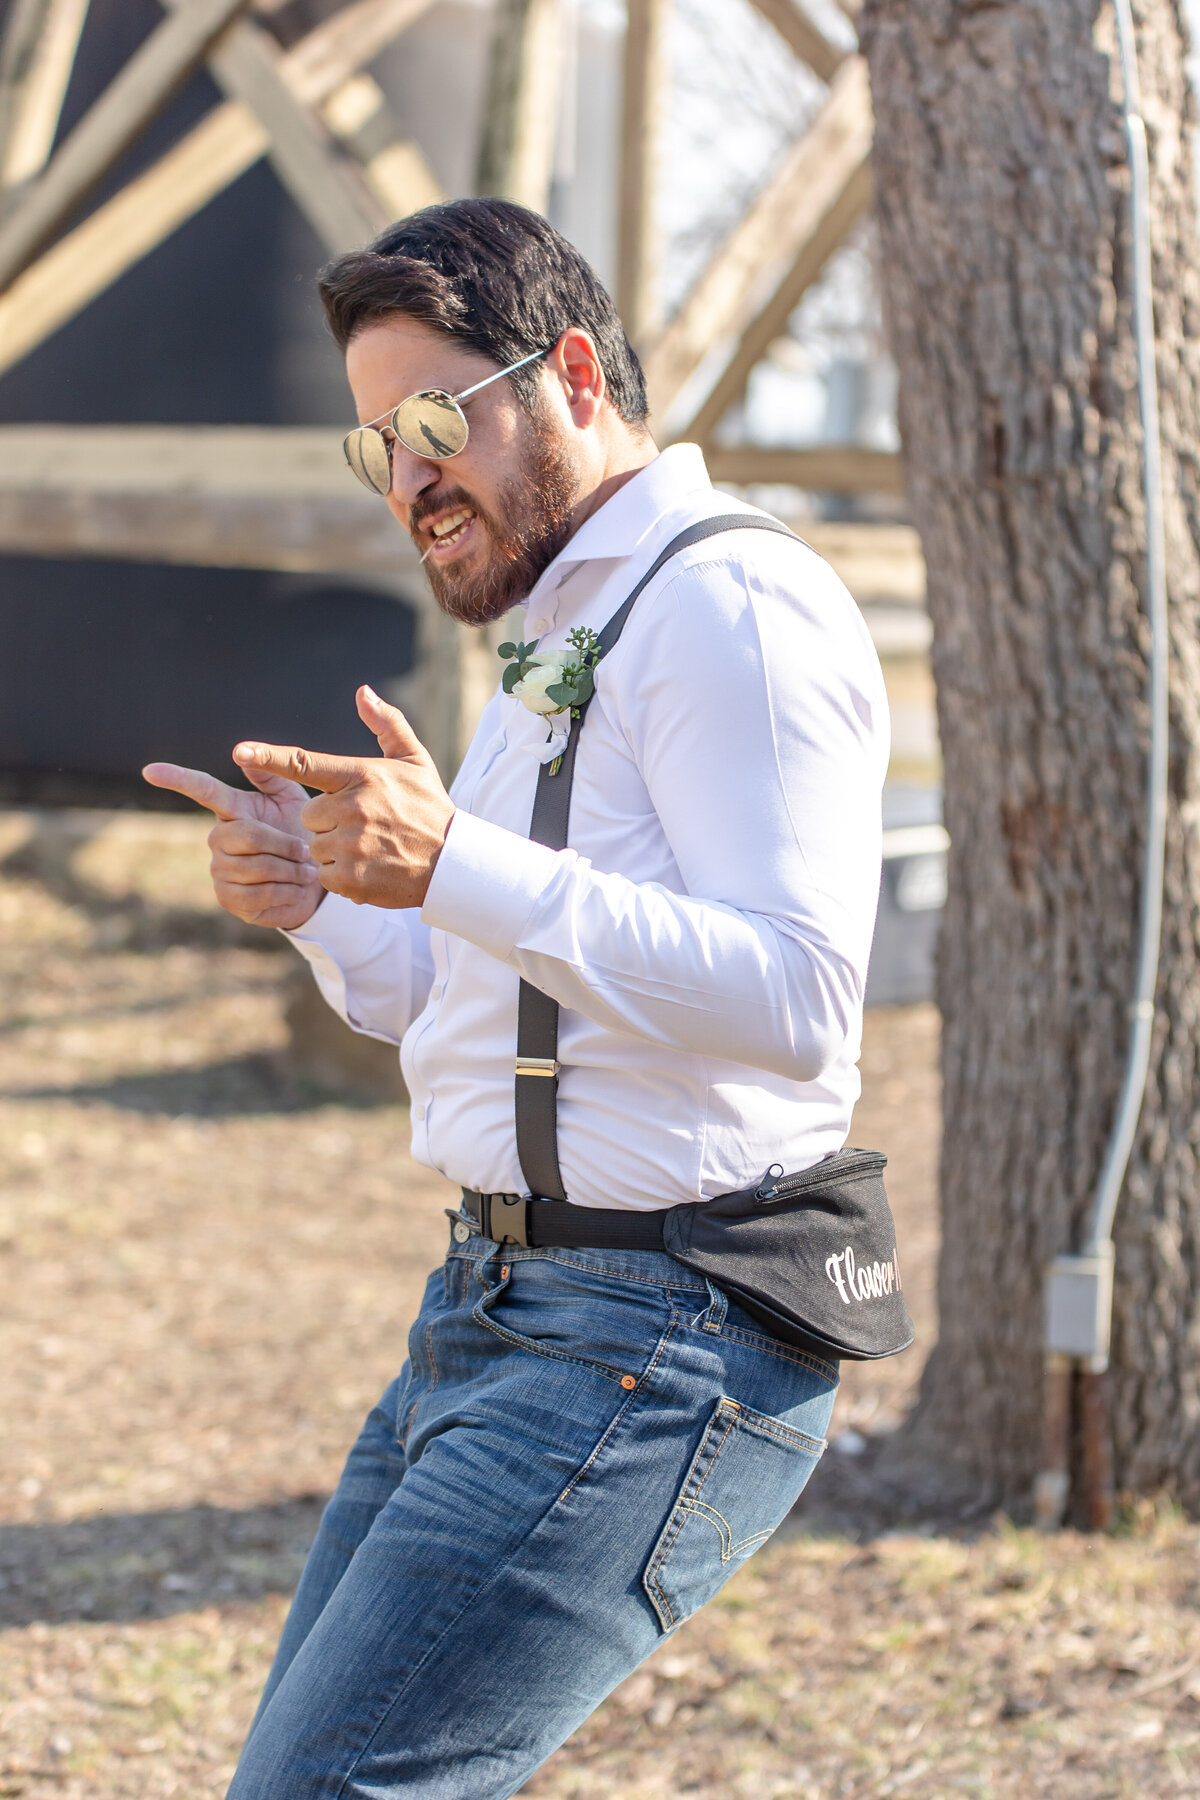 flower man dances down aisle in sunglasses and suspenders with fanny pack in Boerne Texas